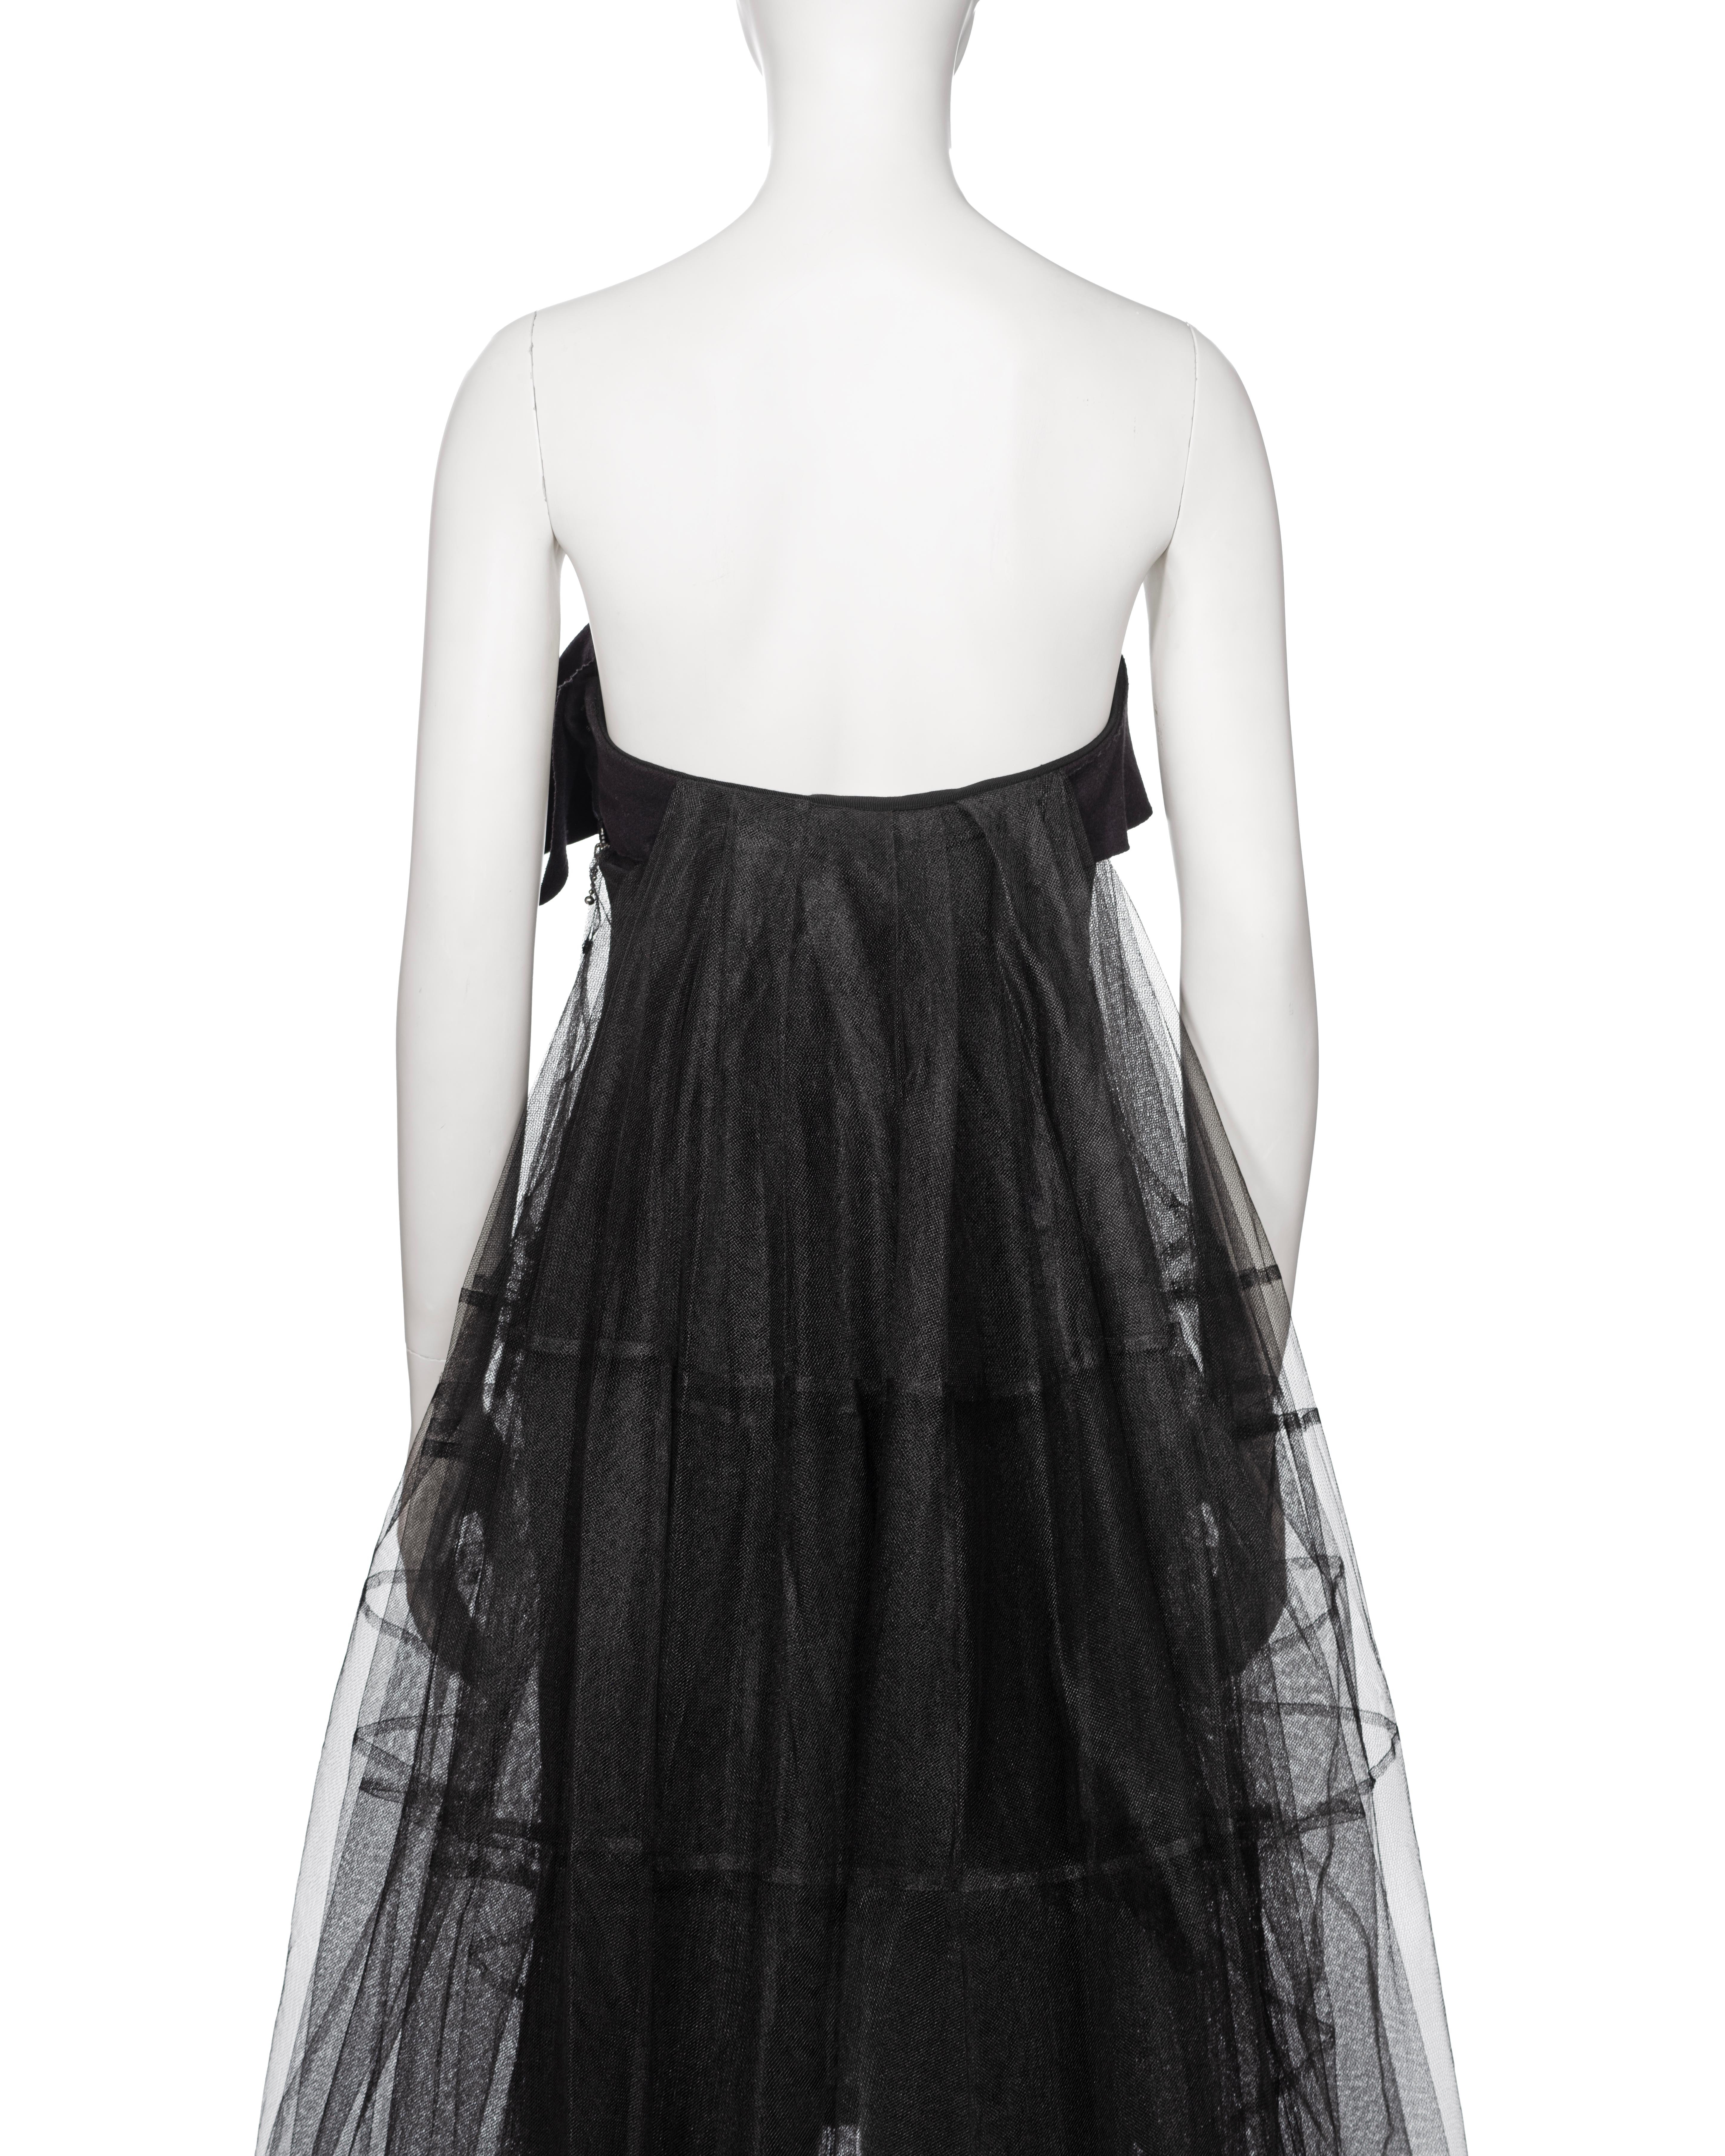 Louis Vuitton by Marc Jacobs Black Wool Strapless Dress with Petticoat, fw 2008 For Sale 9